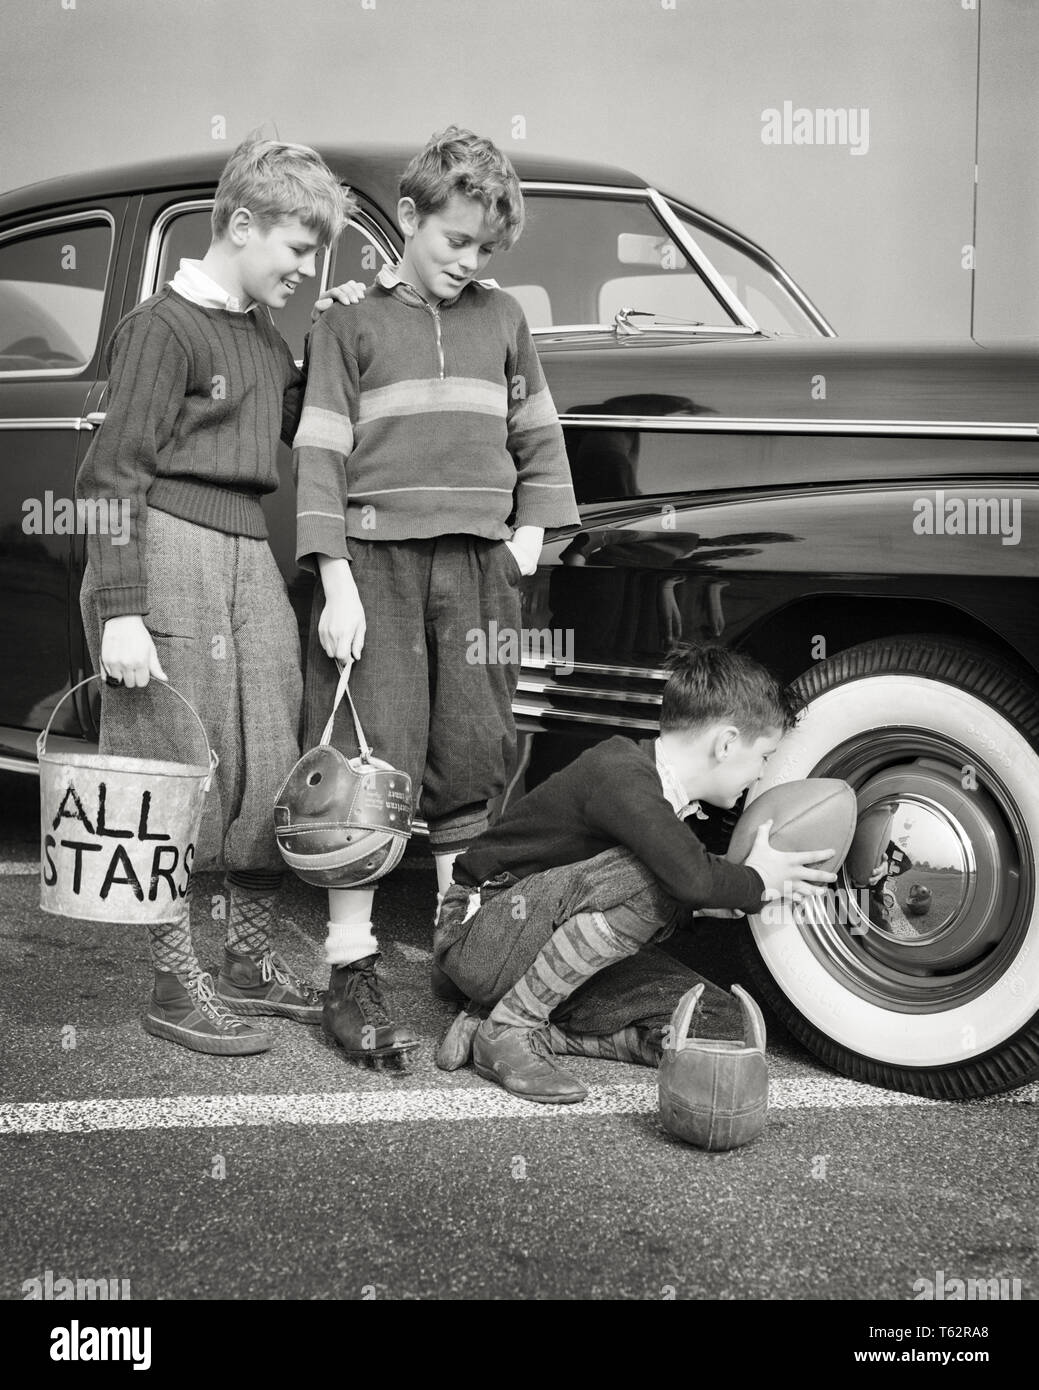 1940s THREE PRETEEN BOYS FOOTBALL PLAYERS WEARING KNICKERBOCKERS FILLING BALL WITH AIR SWIPED FROM AUTOMOBILE WHITEWALL TIRE - b13555 HAR001 HARS TEAMWORK ATHLETE KNICKERS LIFESTYLE BROTHERS TIRE WOOL COPY SPACE FULL-LENGTH HALF-LENGTH INSPIRATION AUTOMOBILE MALES RISK ATHLETIC SIBLINGS TRANSPORTATION PLAYERS STEALING B&W SUCCESS TEMPTATION ADVENTURE FILLING STYLES TROUSERS STRATEGY AUTOS WHITEWALL RECREATION INNOVATION OPPORTUNITY PRETEEN SIBLING AUTOMOBILES IMAGINATION STYLISH VEHICLES INFLATING KNICKERBOCKERS CREATIVITY FASHIONS IDEAS JUVENILES PRE-TEEN PRE-TEEN BOY TOGETHERNESS Stock Photo